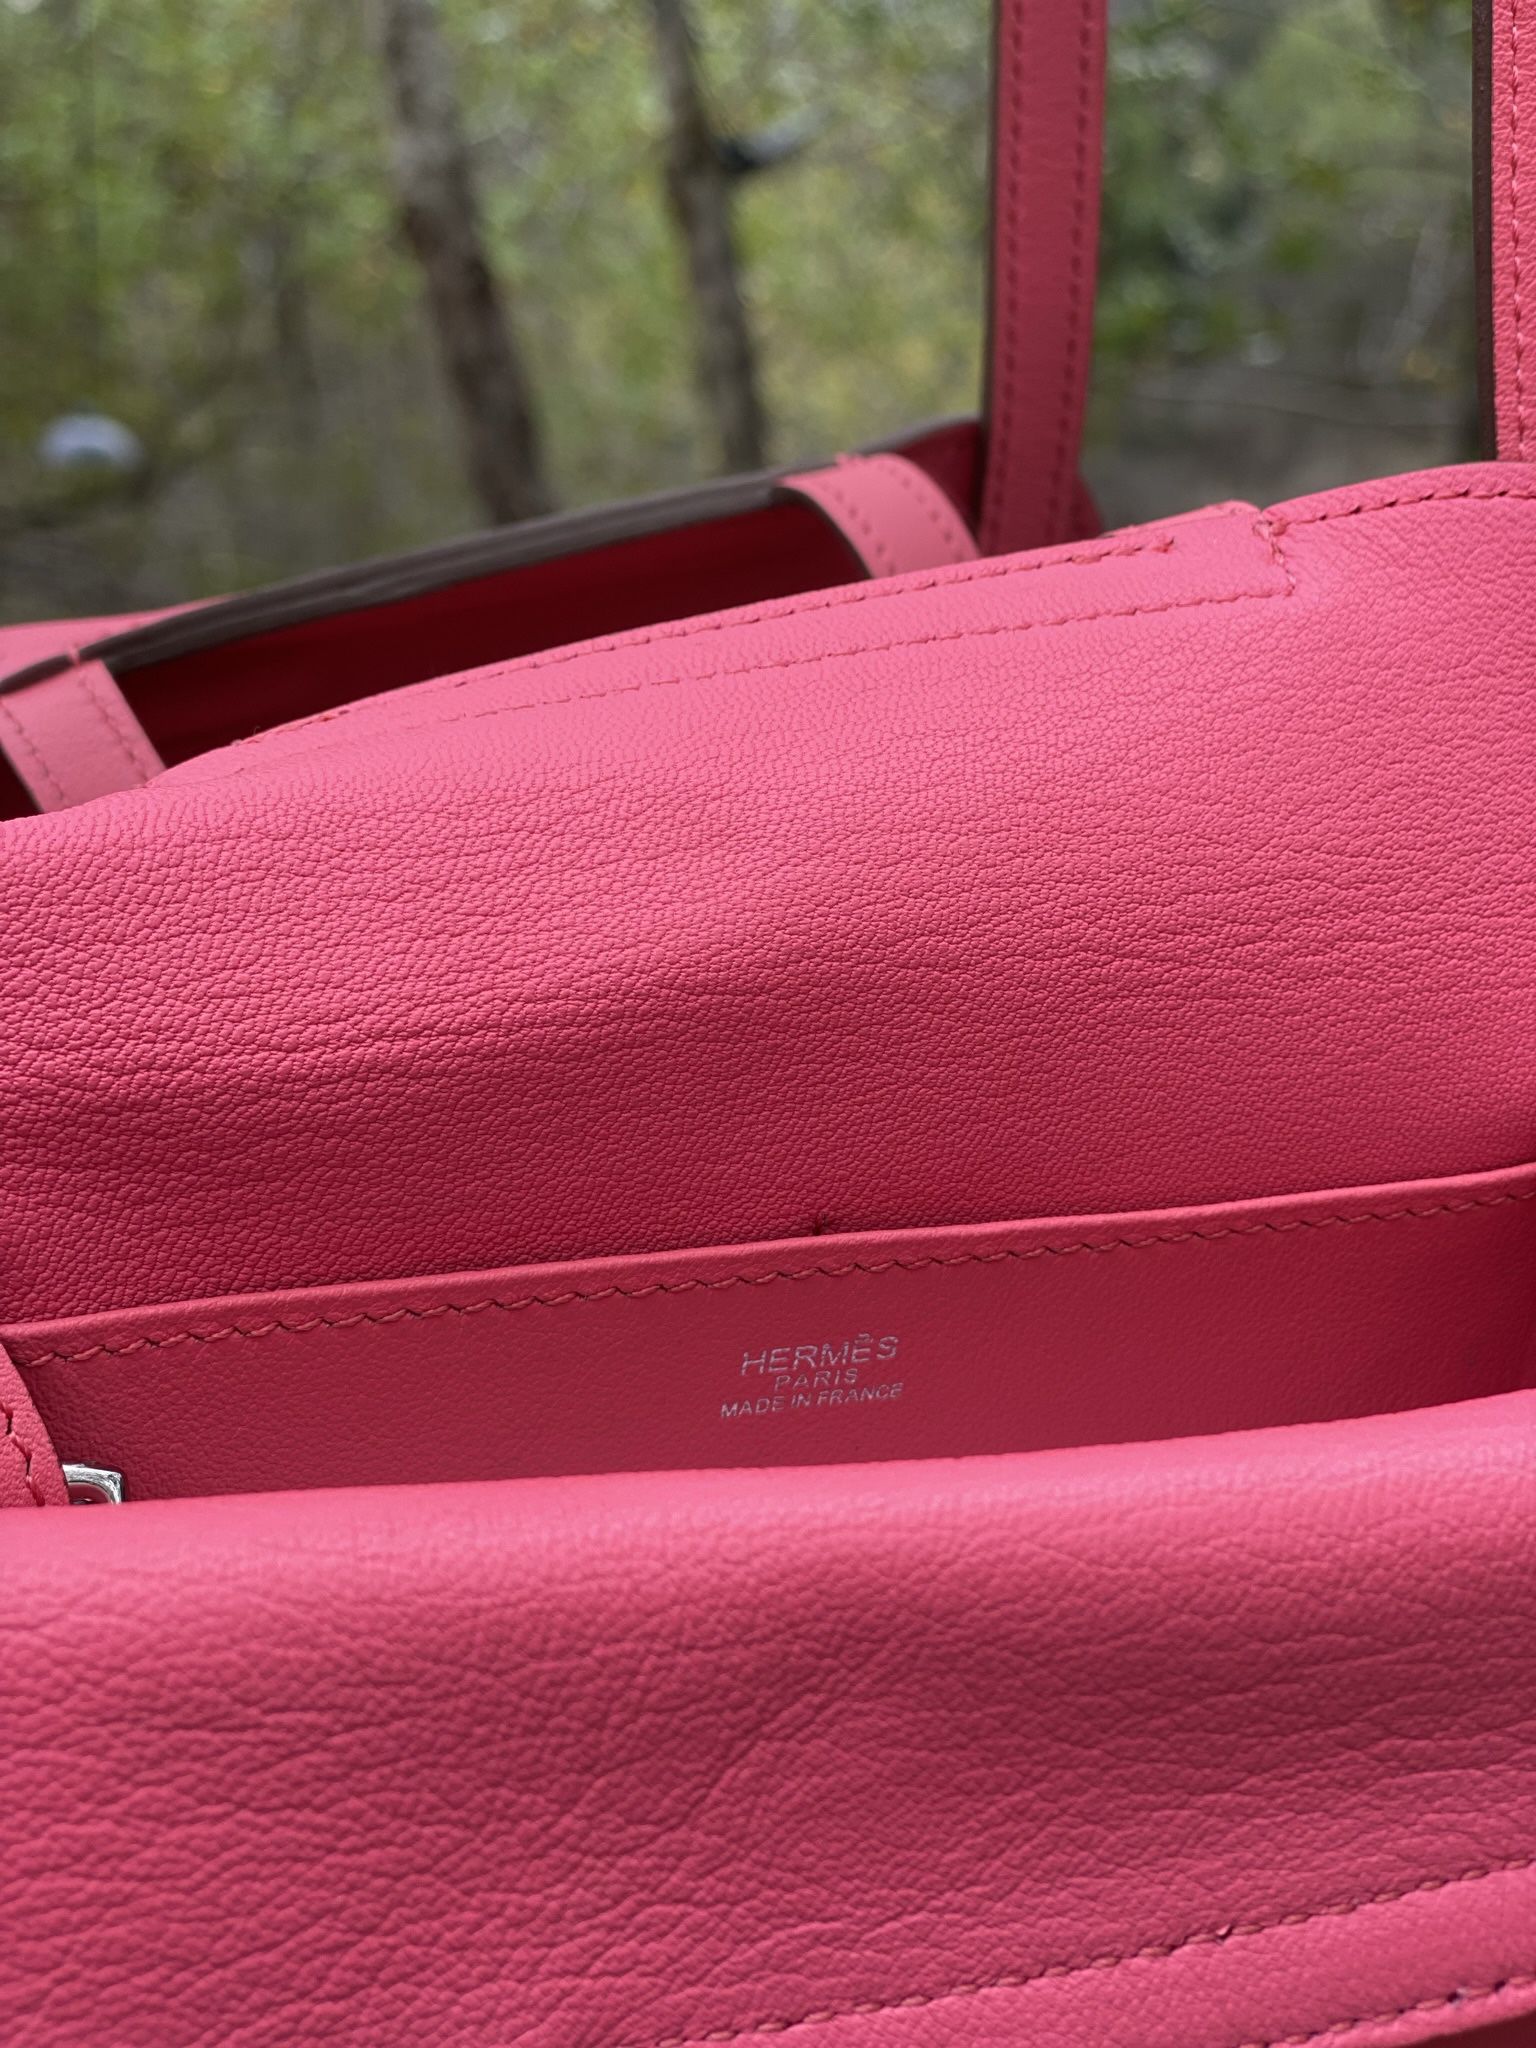 Pink Leather Purse